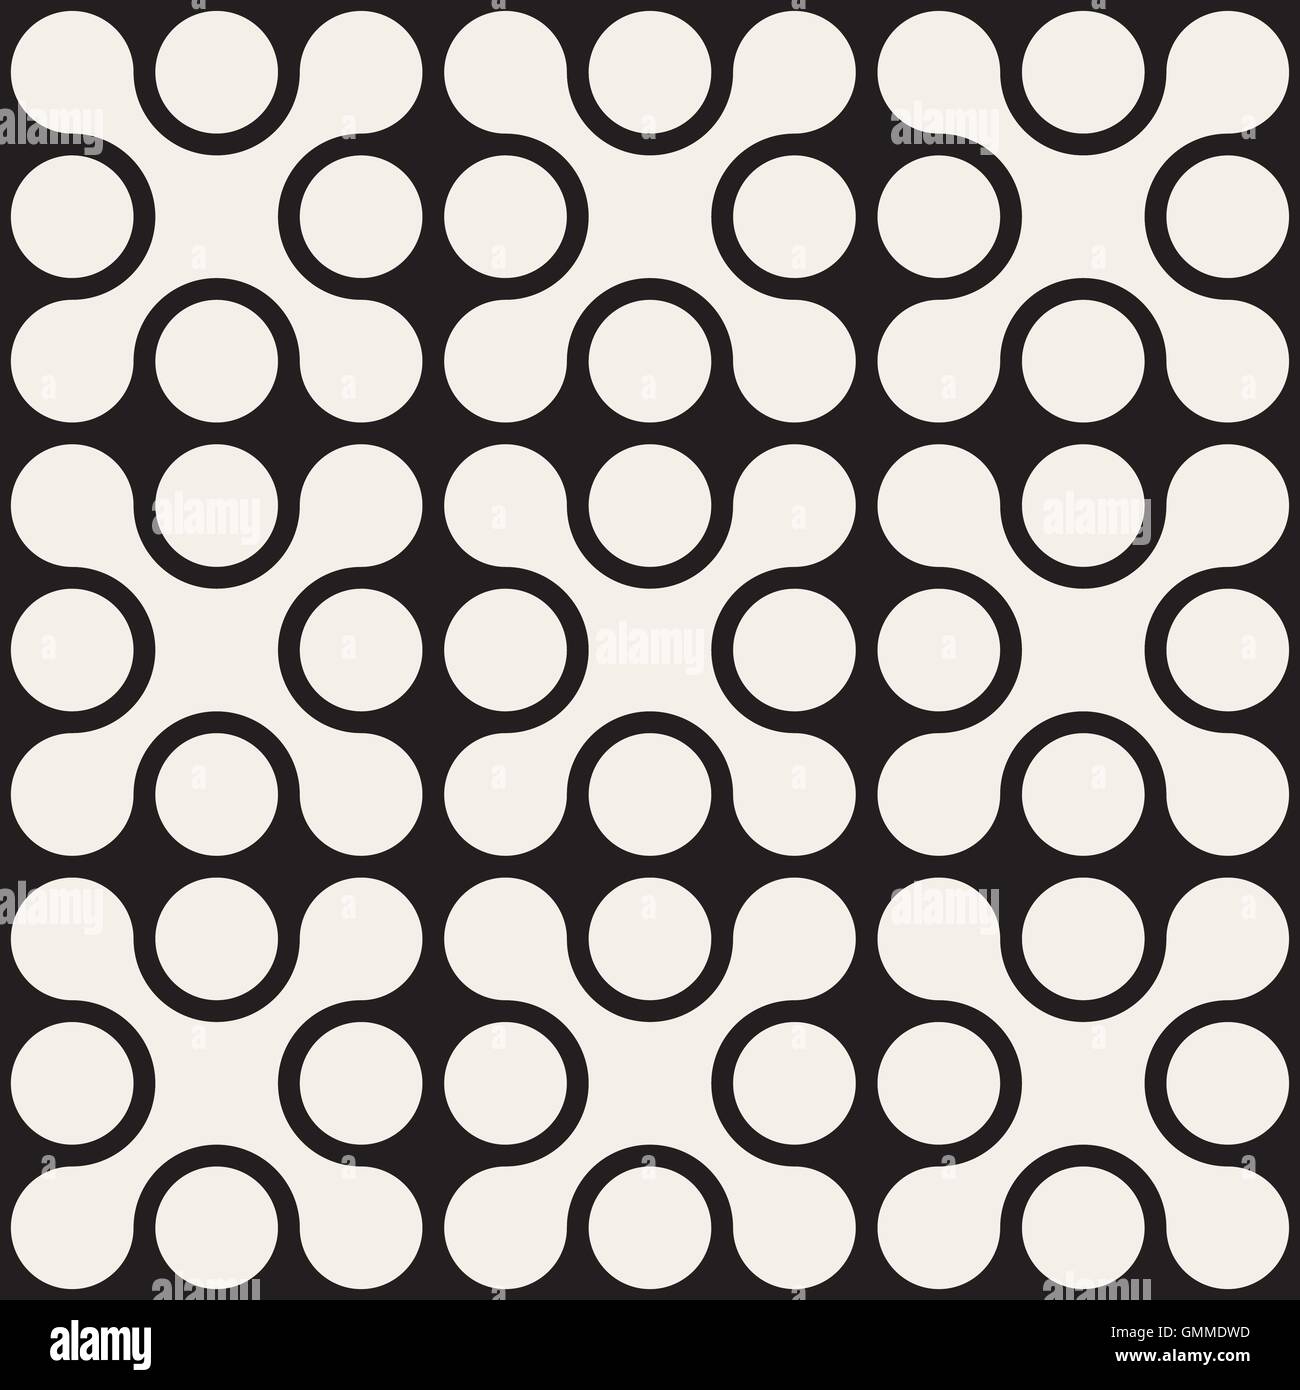 Vector Seamless Black And White Rounded Cross Square Pattern Stock Vector